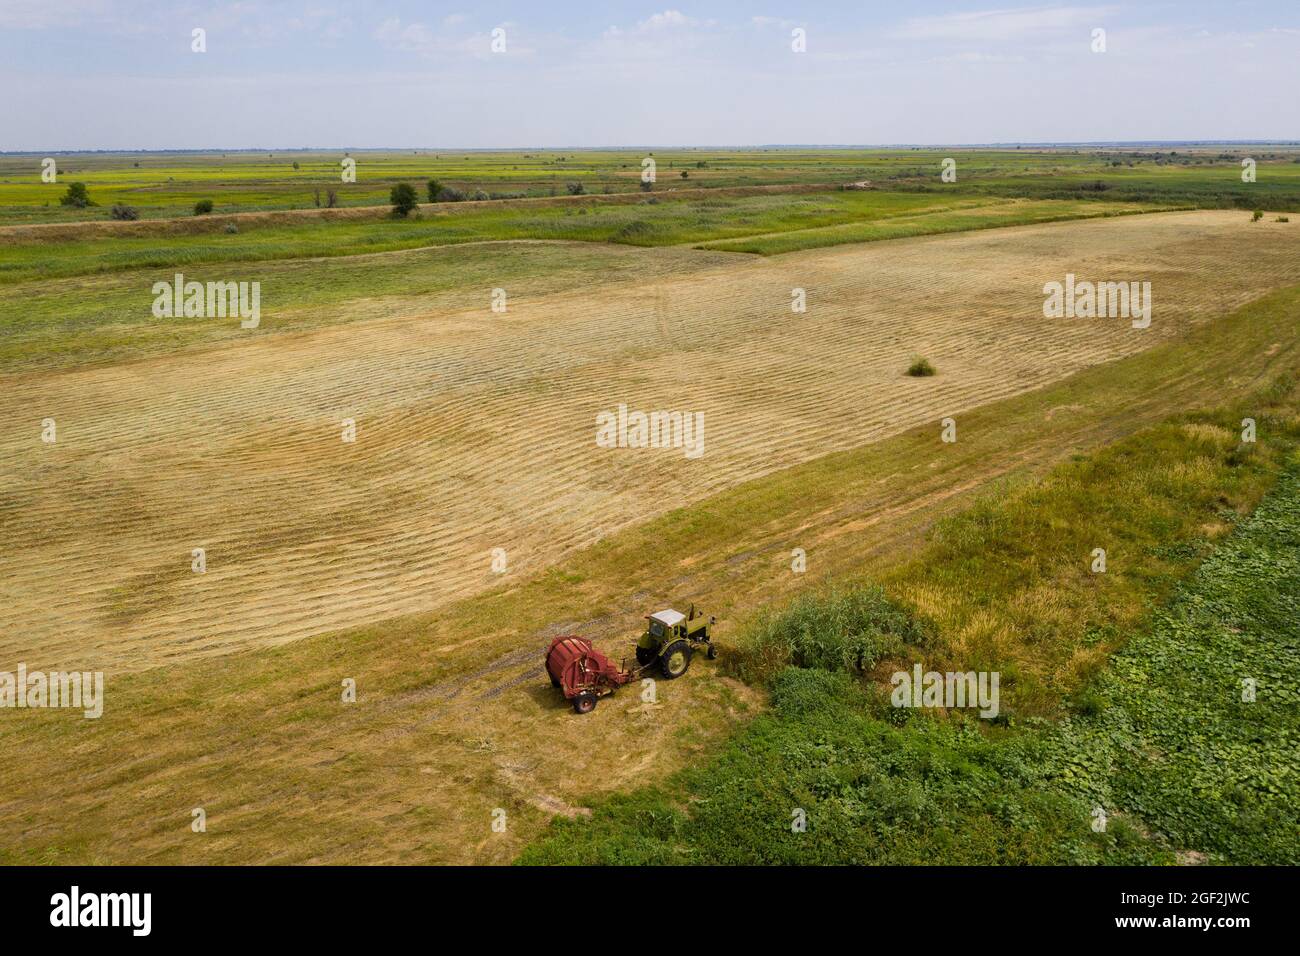 Tractor for making straw bales on harvested wheat field. Aerial view Stock Photo